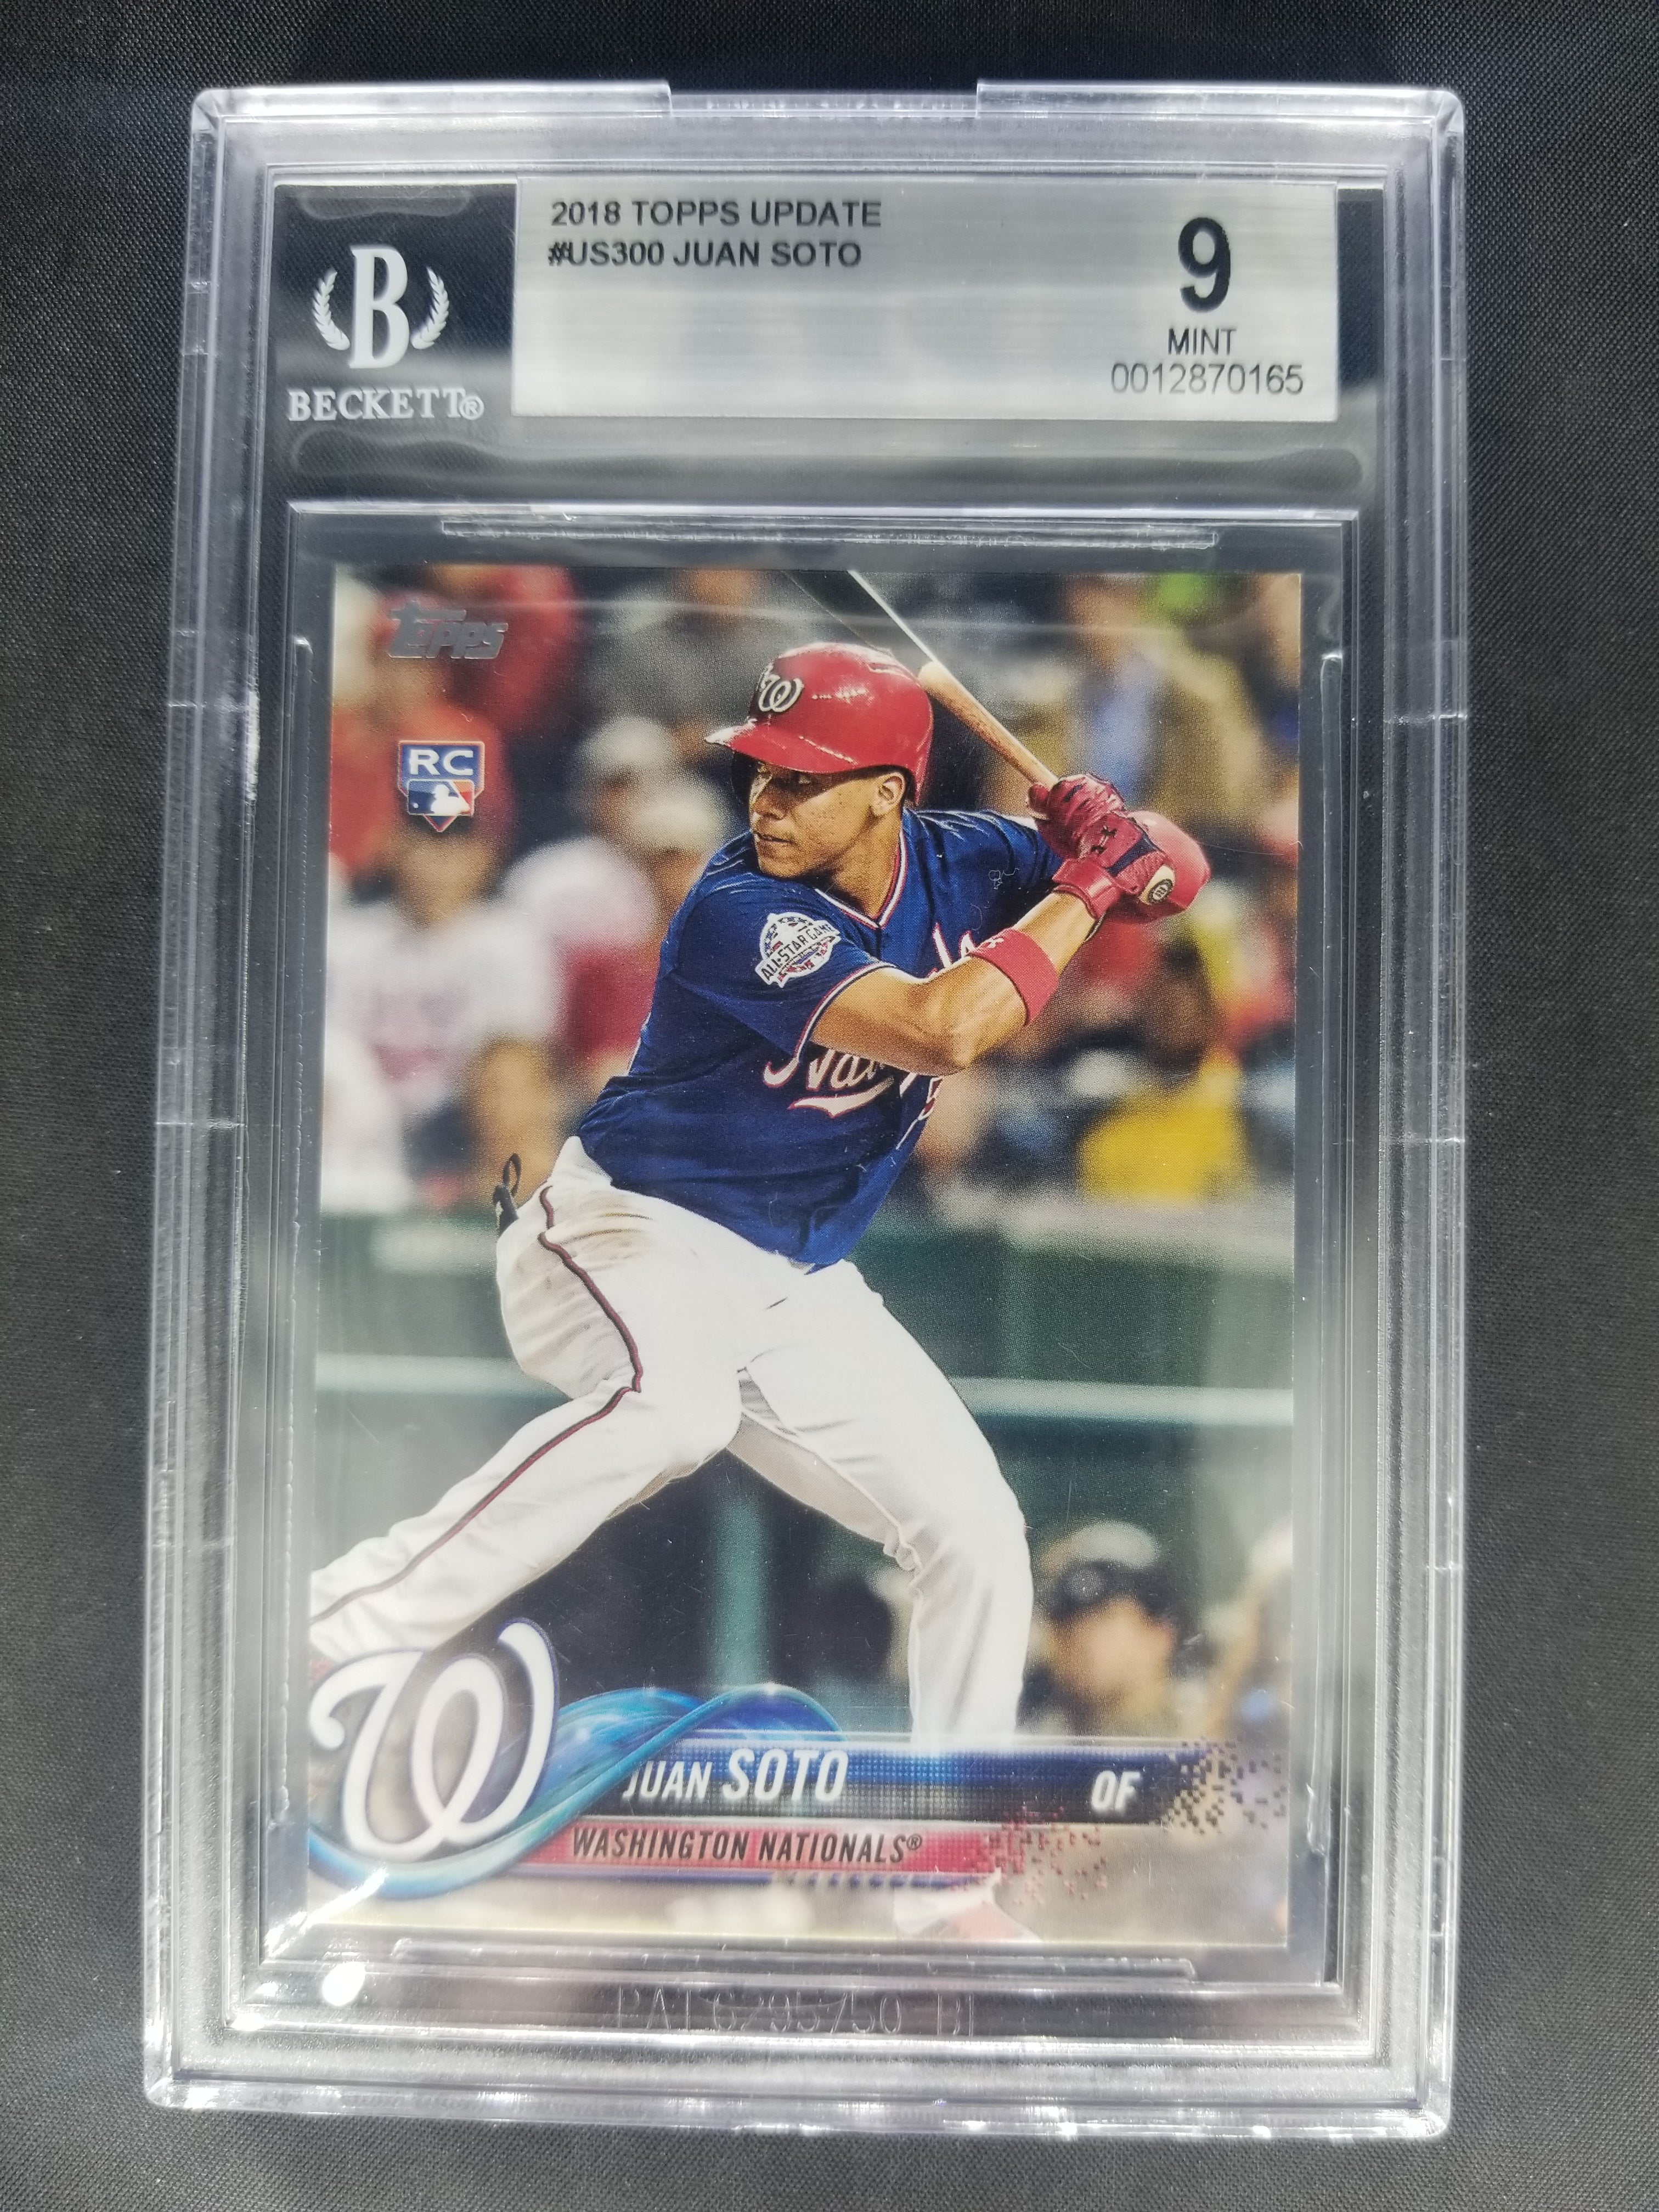 Juan Soto 2018 Topps trading card BGS 9 – All In Autographs